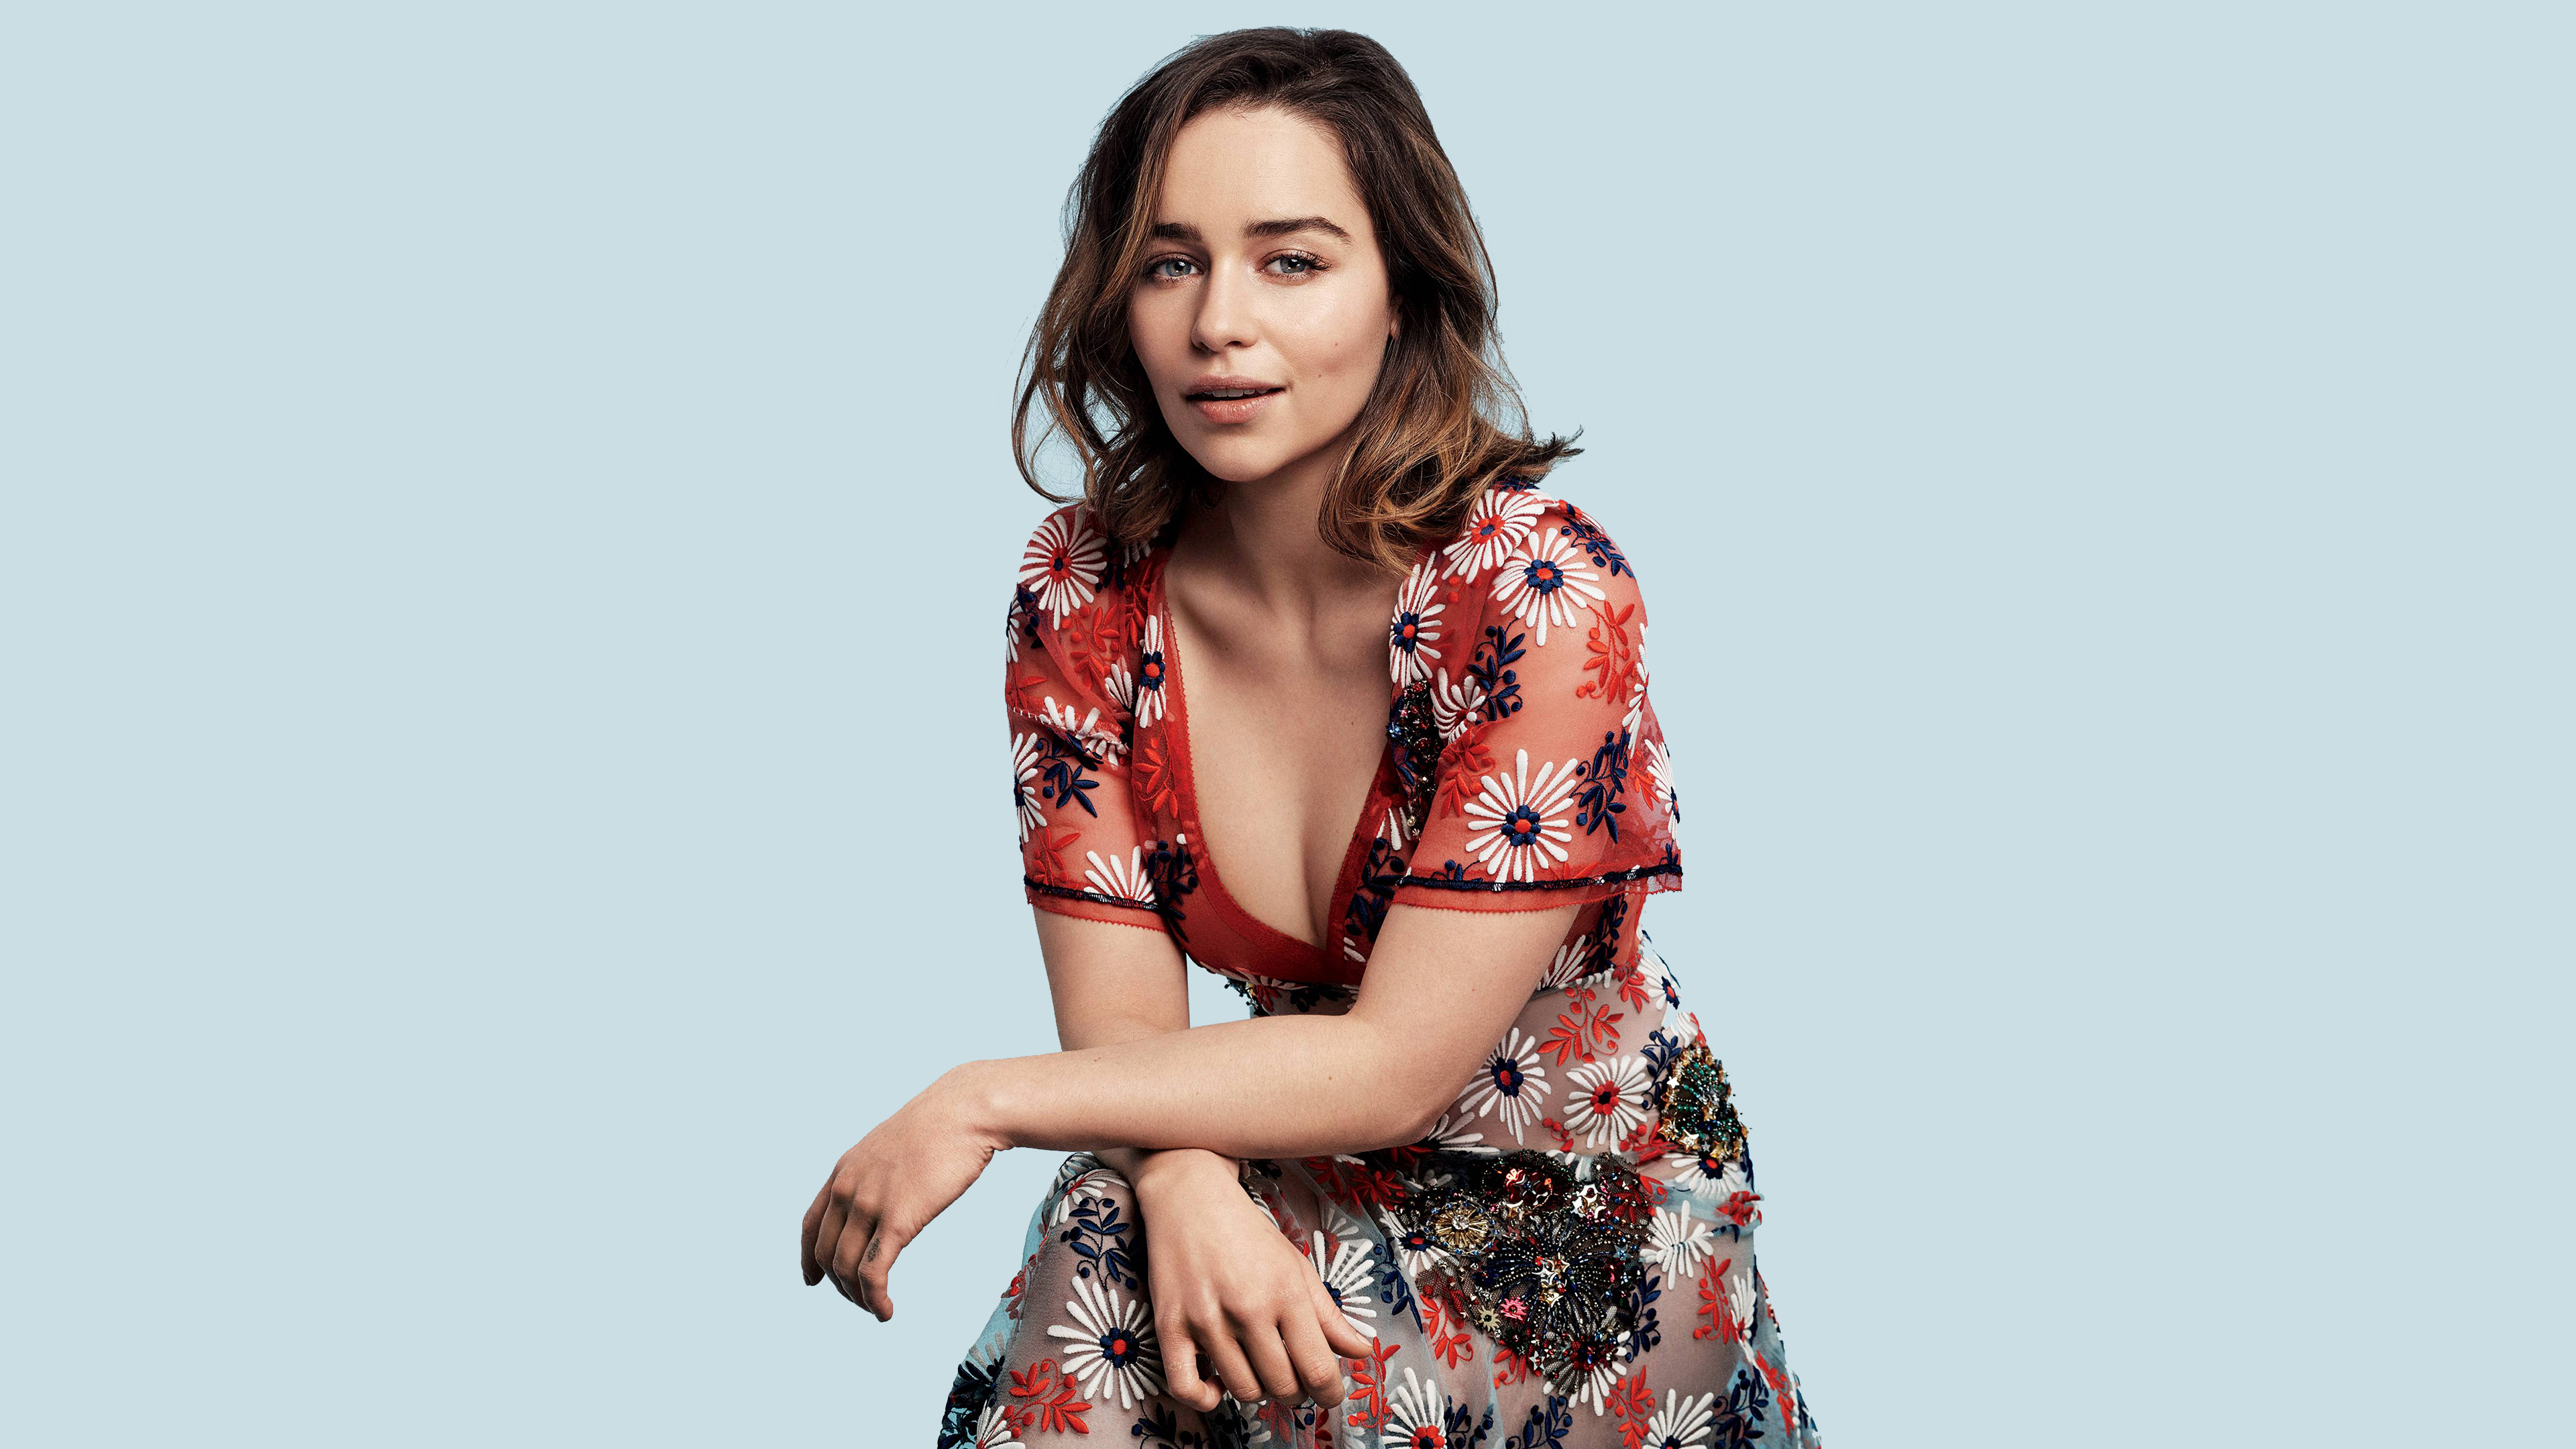 emilia clarke, actress, english, celebrity, brunette for android